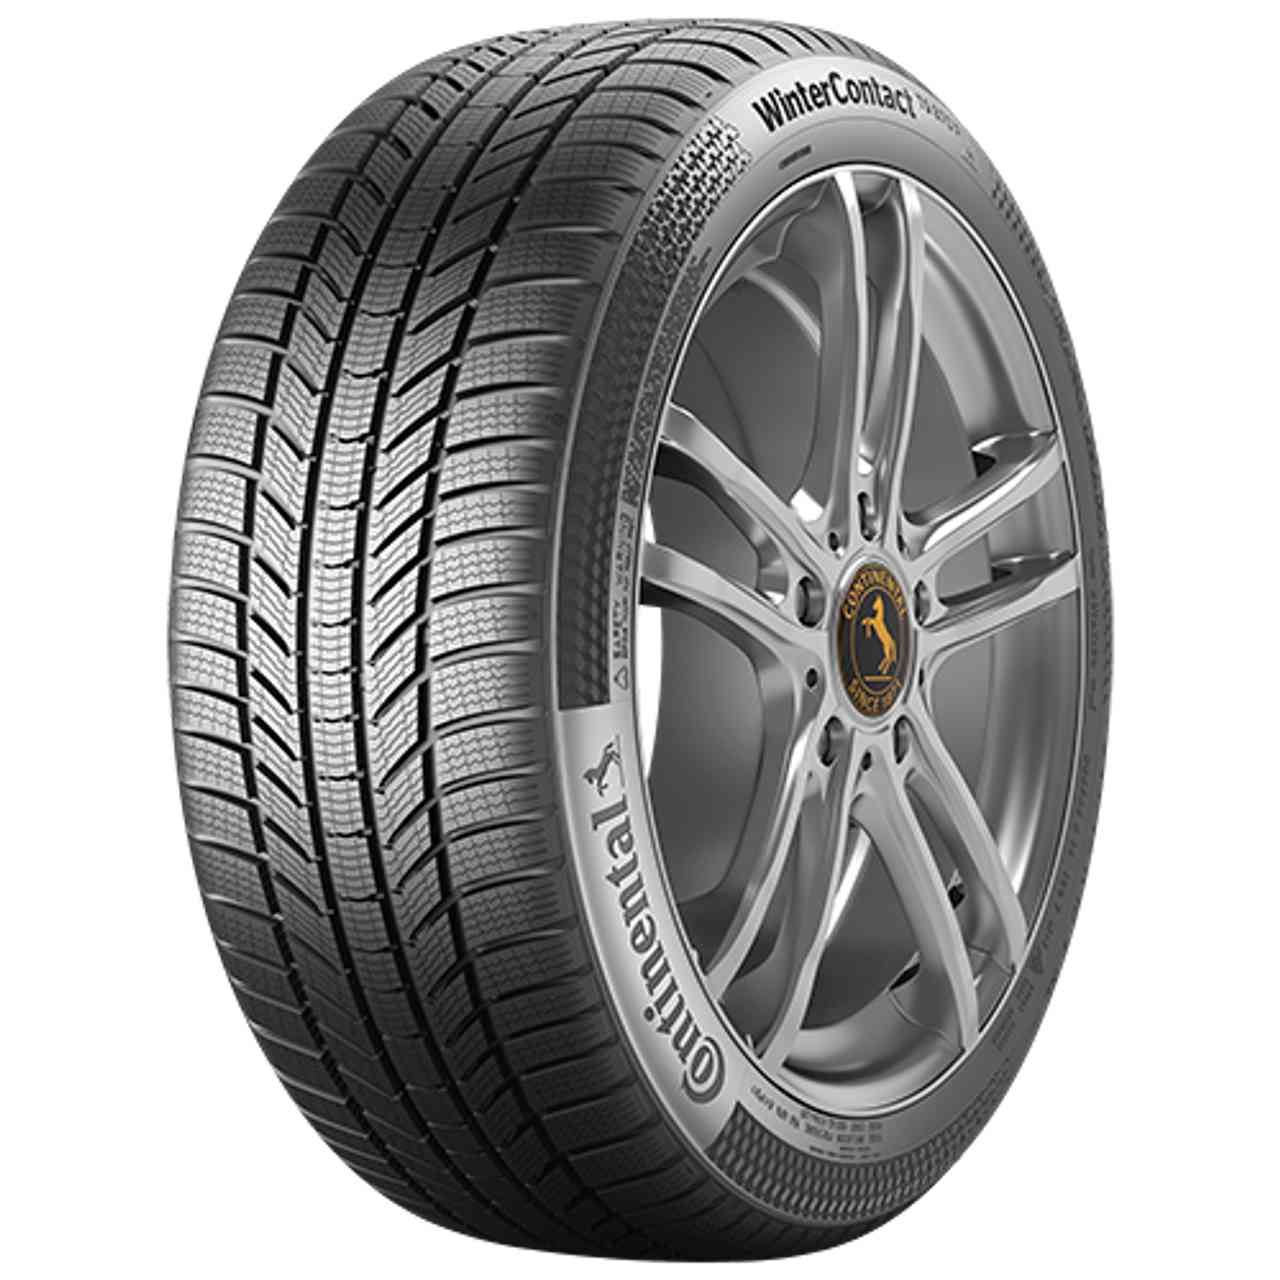 CONTINENTAL WINTERCONTACT TS 870 P (EVc) 255/40R19 100V FR BSW von Continental